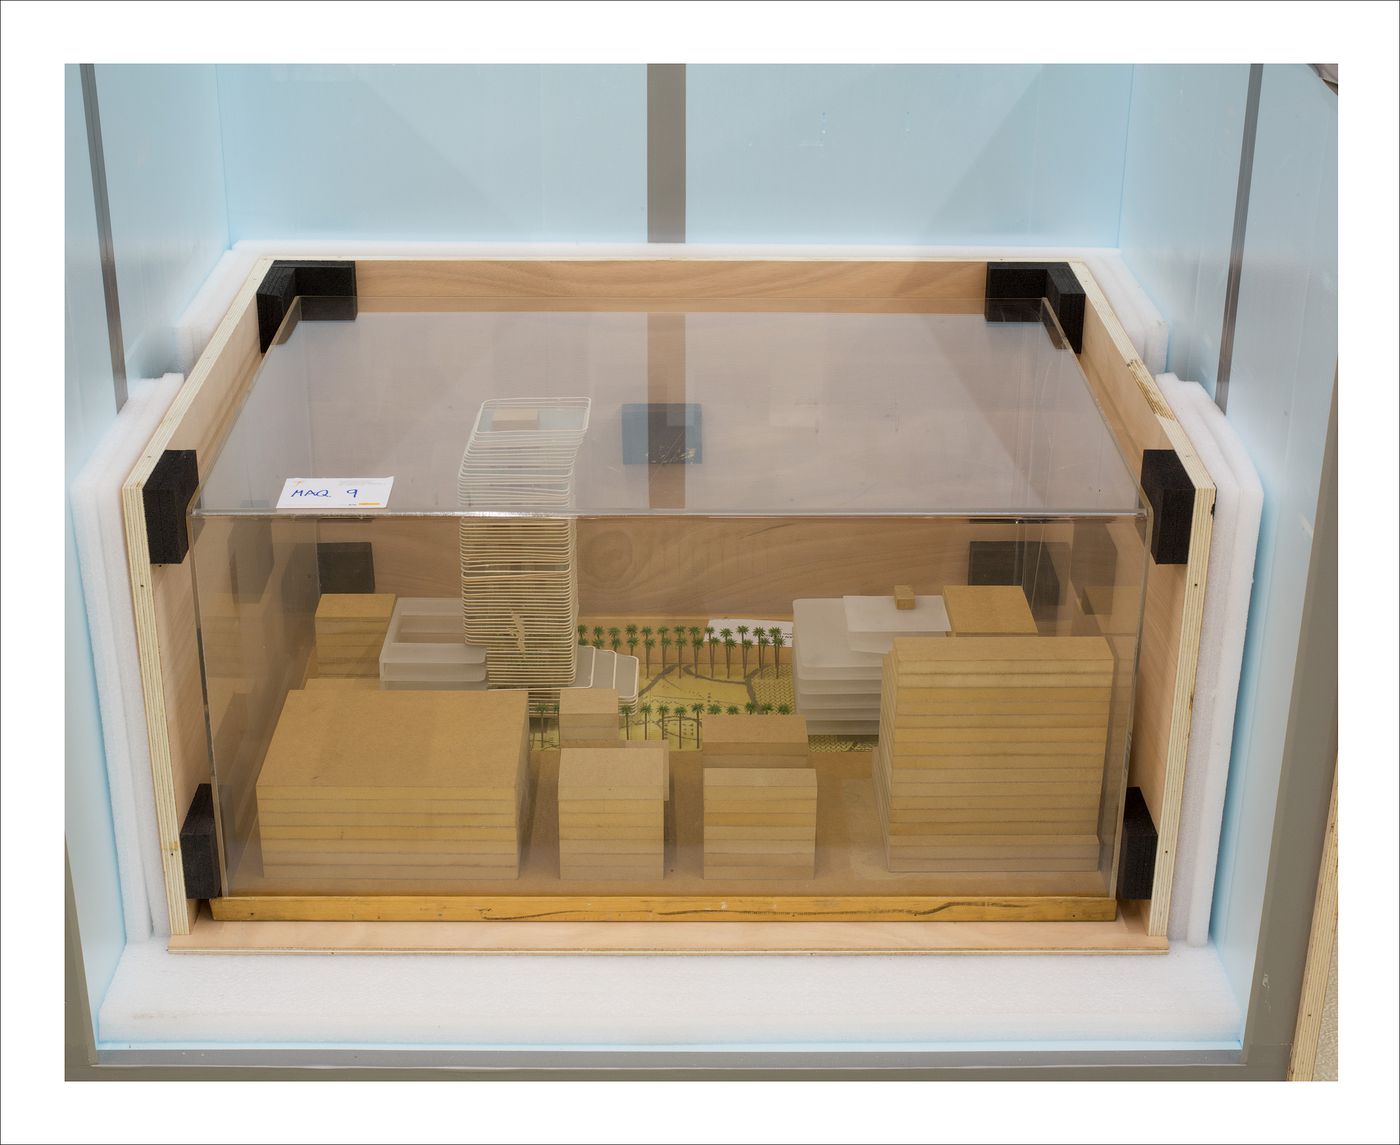 Proofs of Relevance: View of a model in a crate showing Woermann Public Square and Building, Abalos & Herreros (2001), Las Palmas de Gran Canaria, Spain